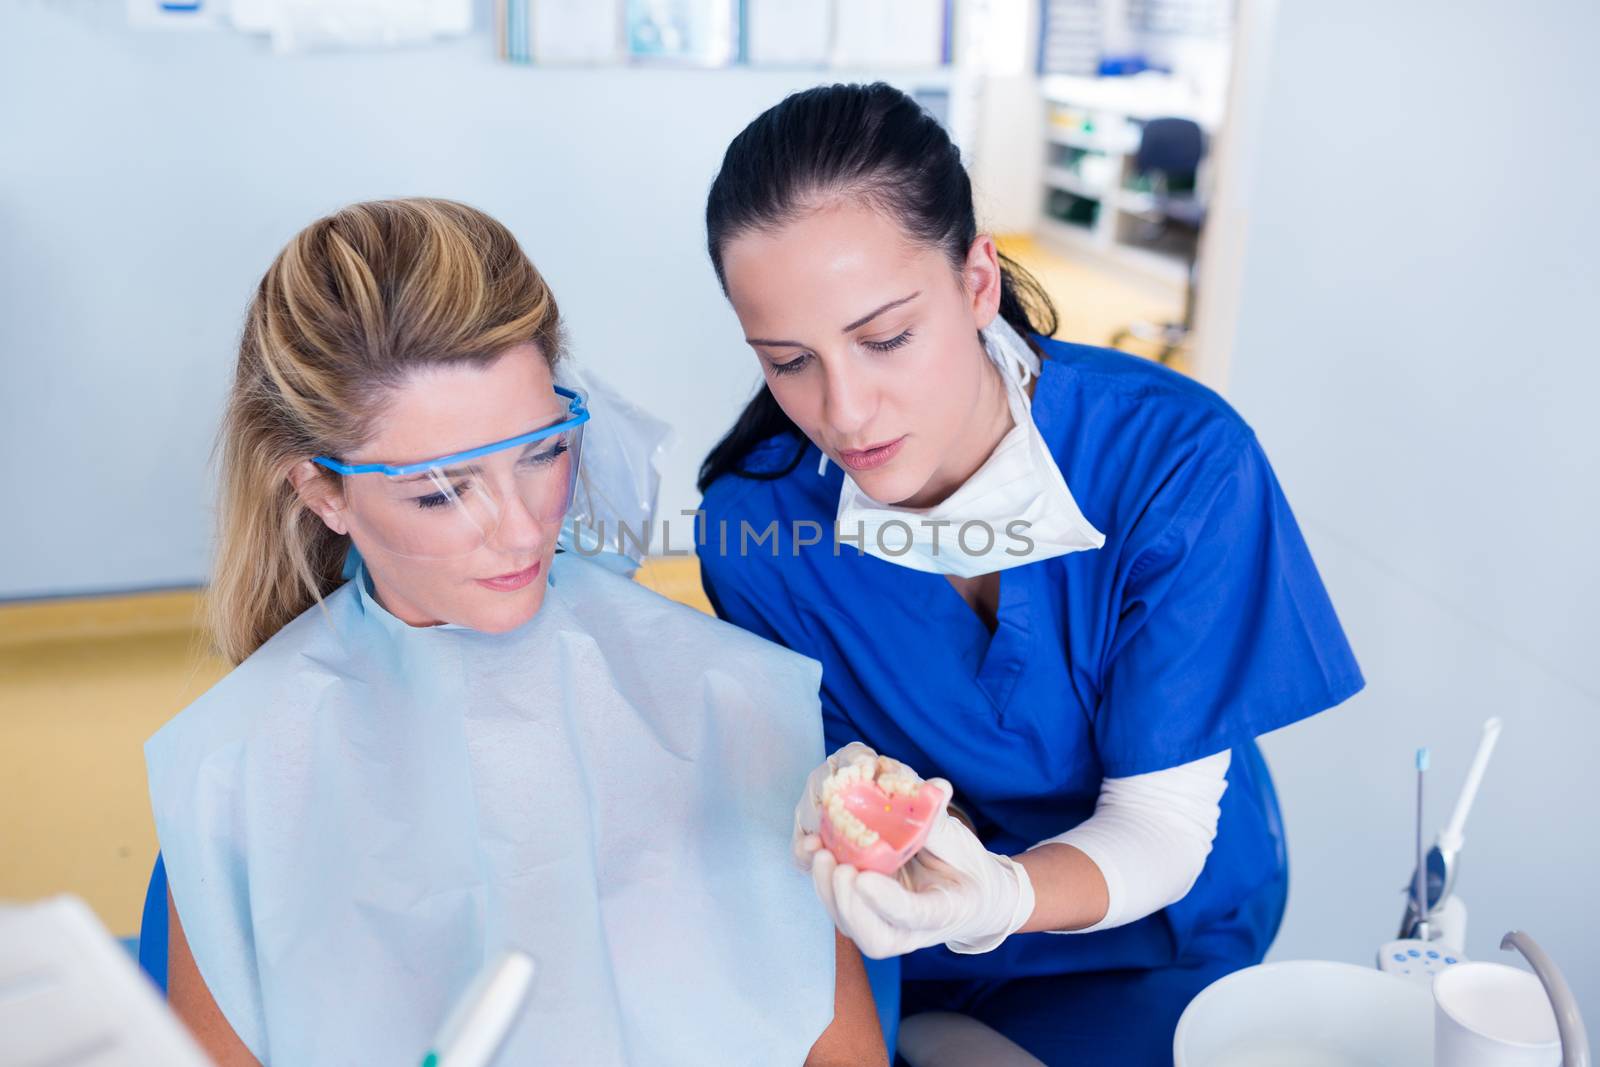 Dentist showing patient model of teeth at the dental clinic